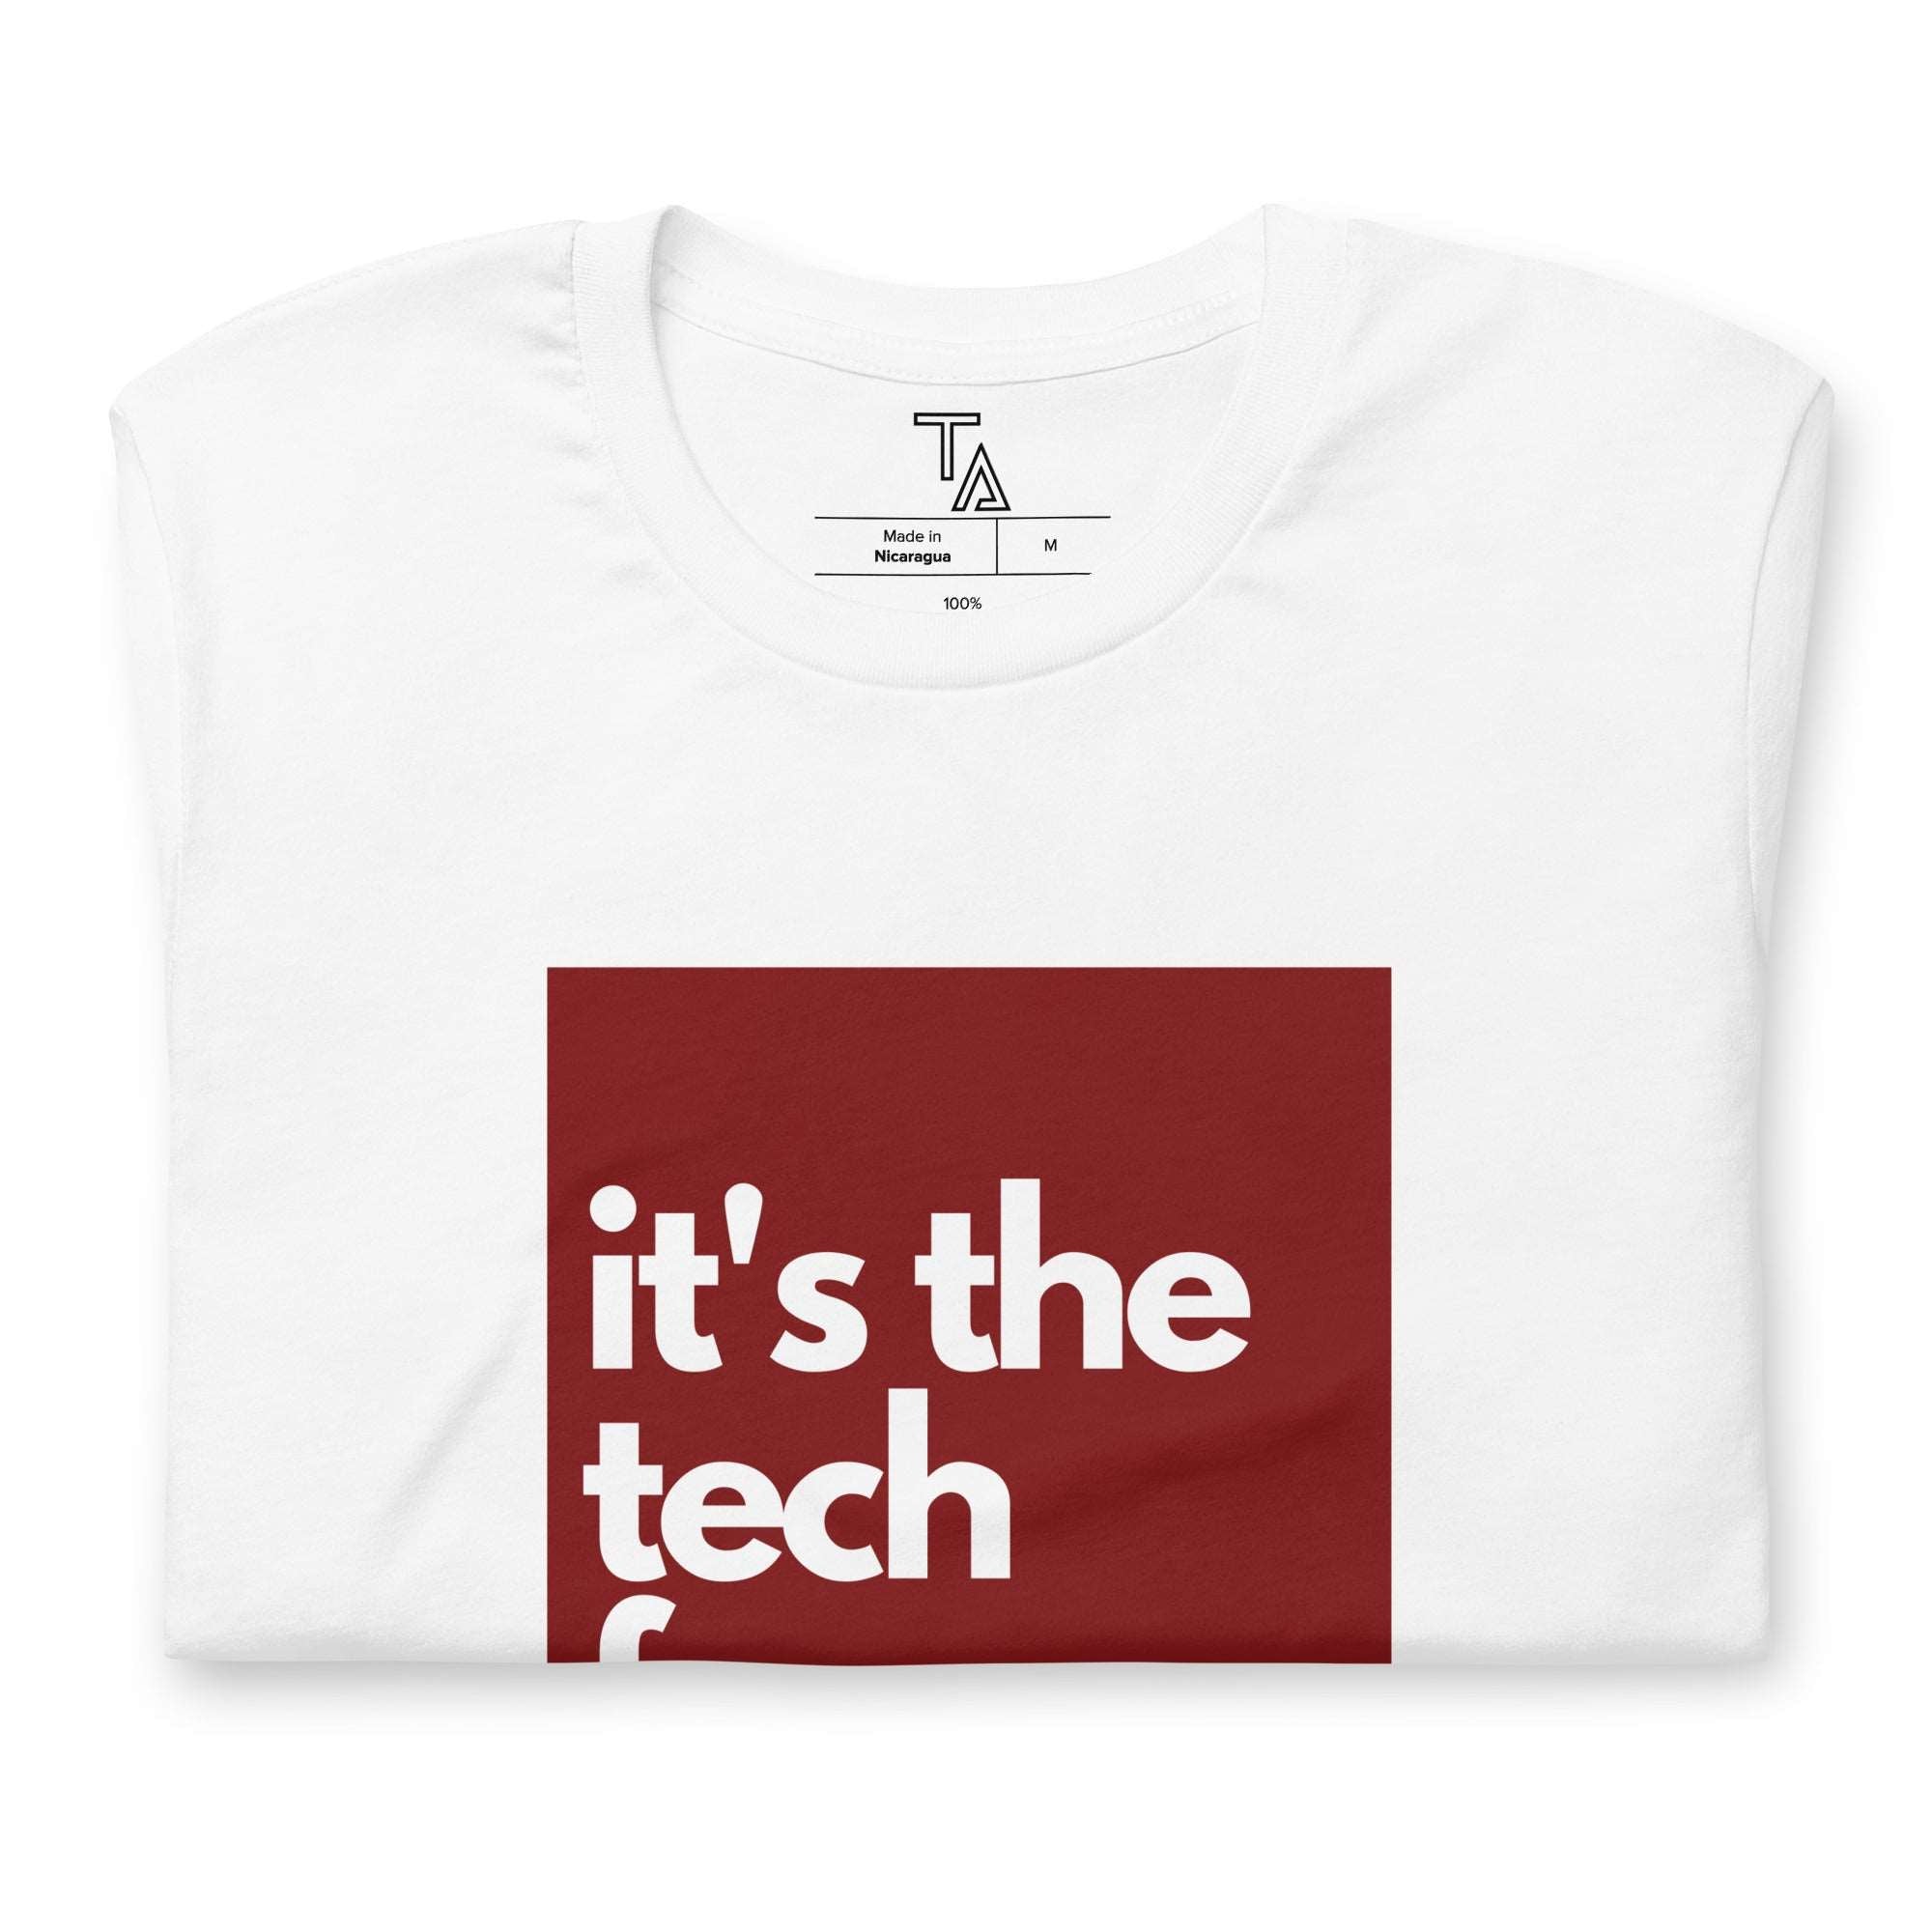 It's the tech for me. T-shirt